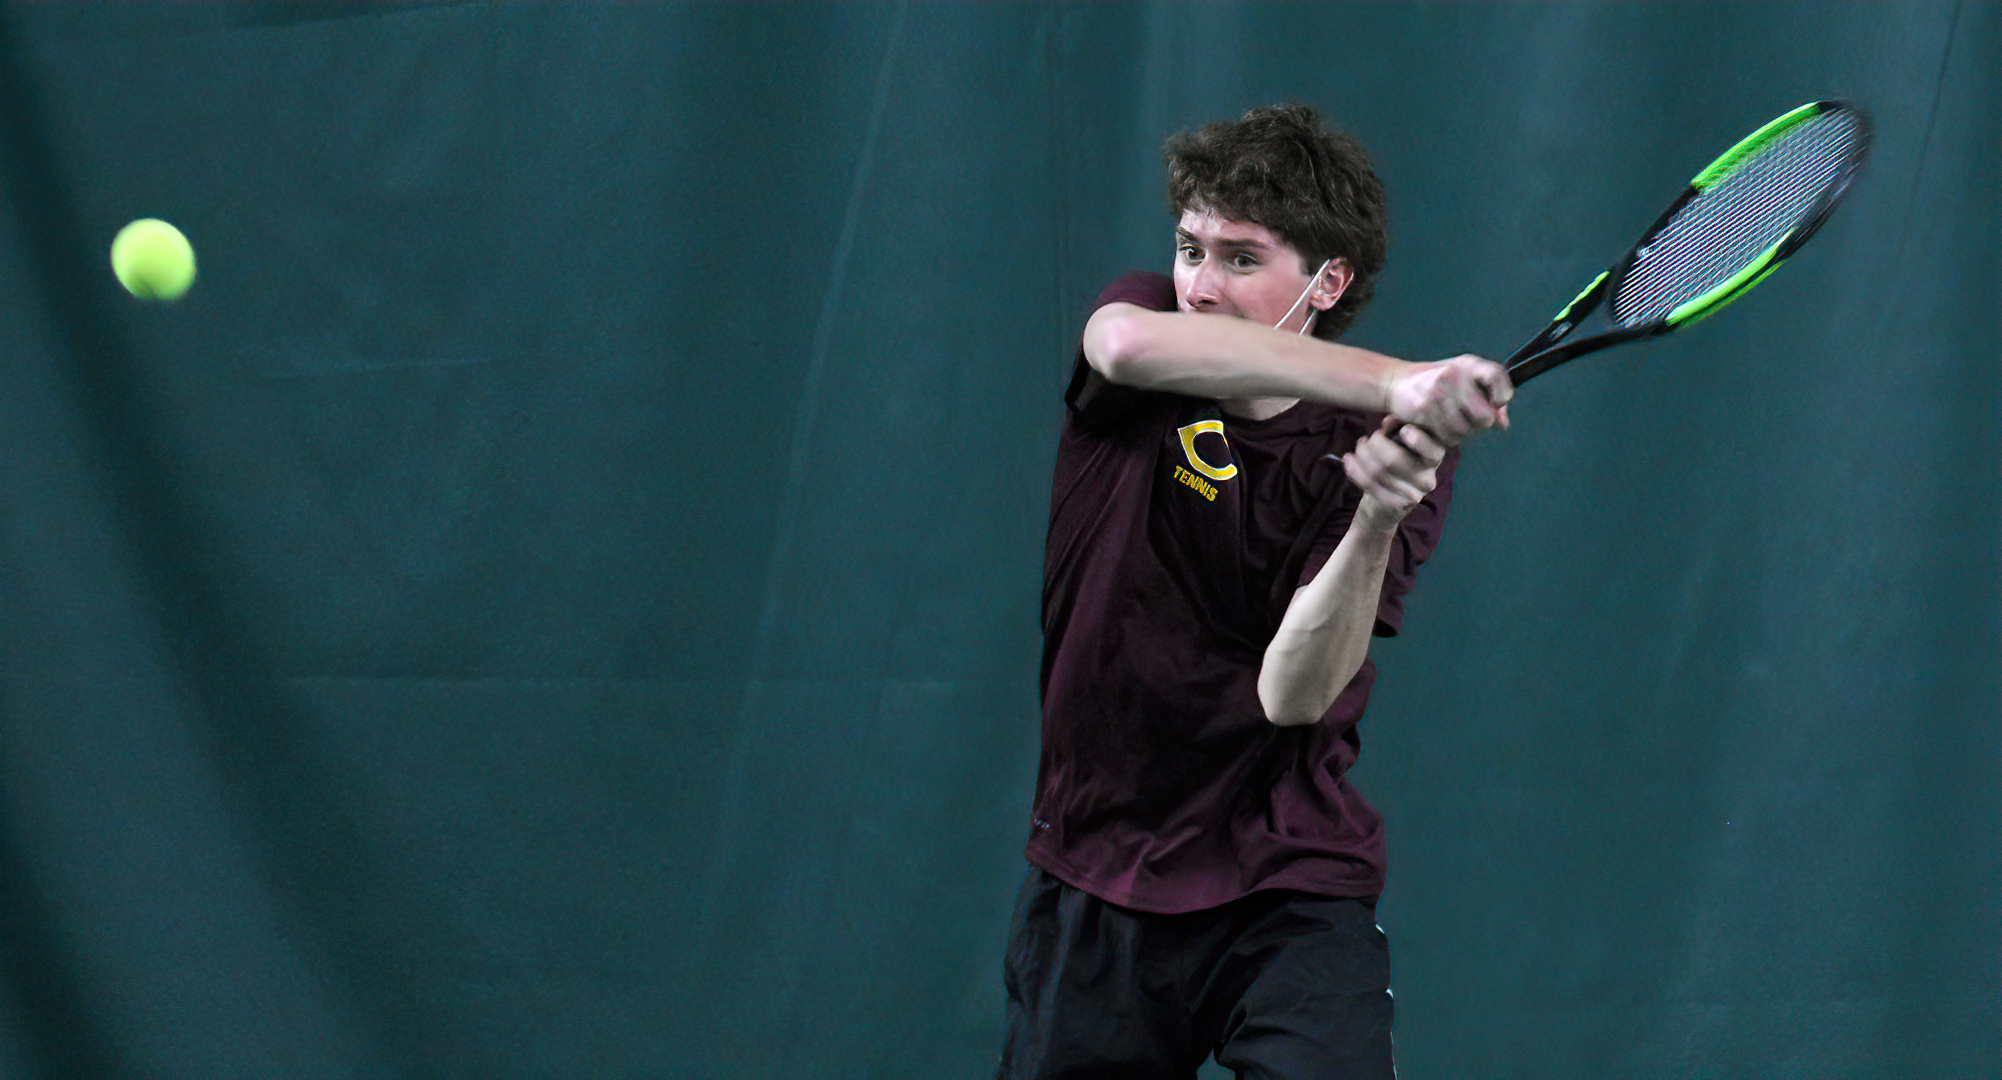 Sophomore Eli Simonson recorded his first singles win of the season with a 6-2, 6-2 decision against Hamline on Saturday.